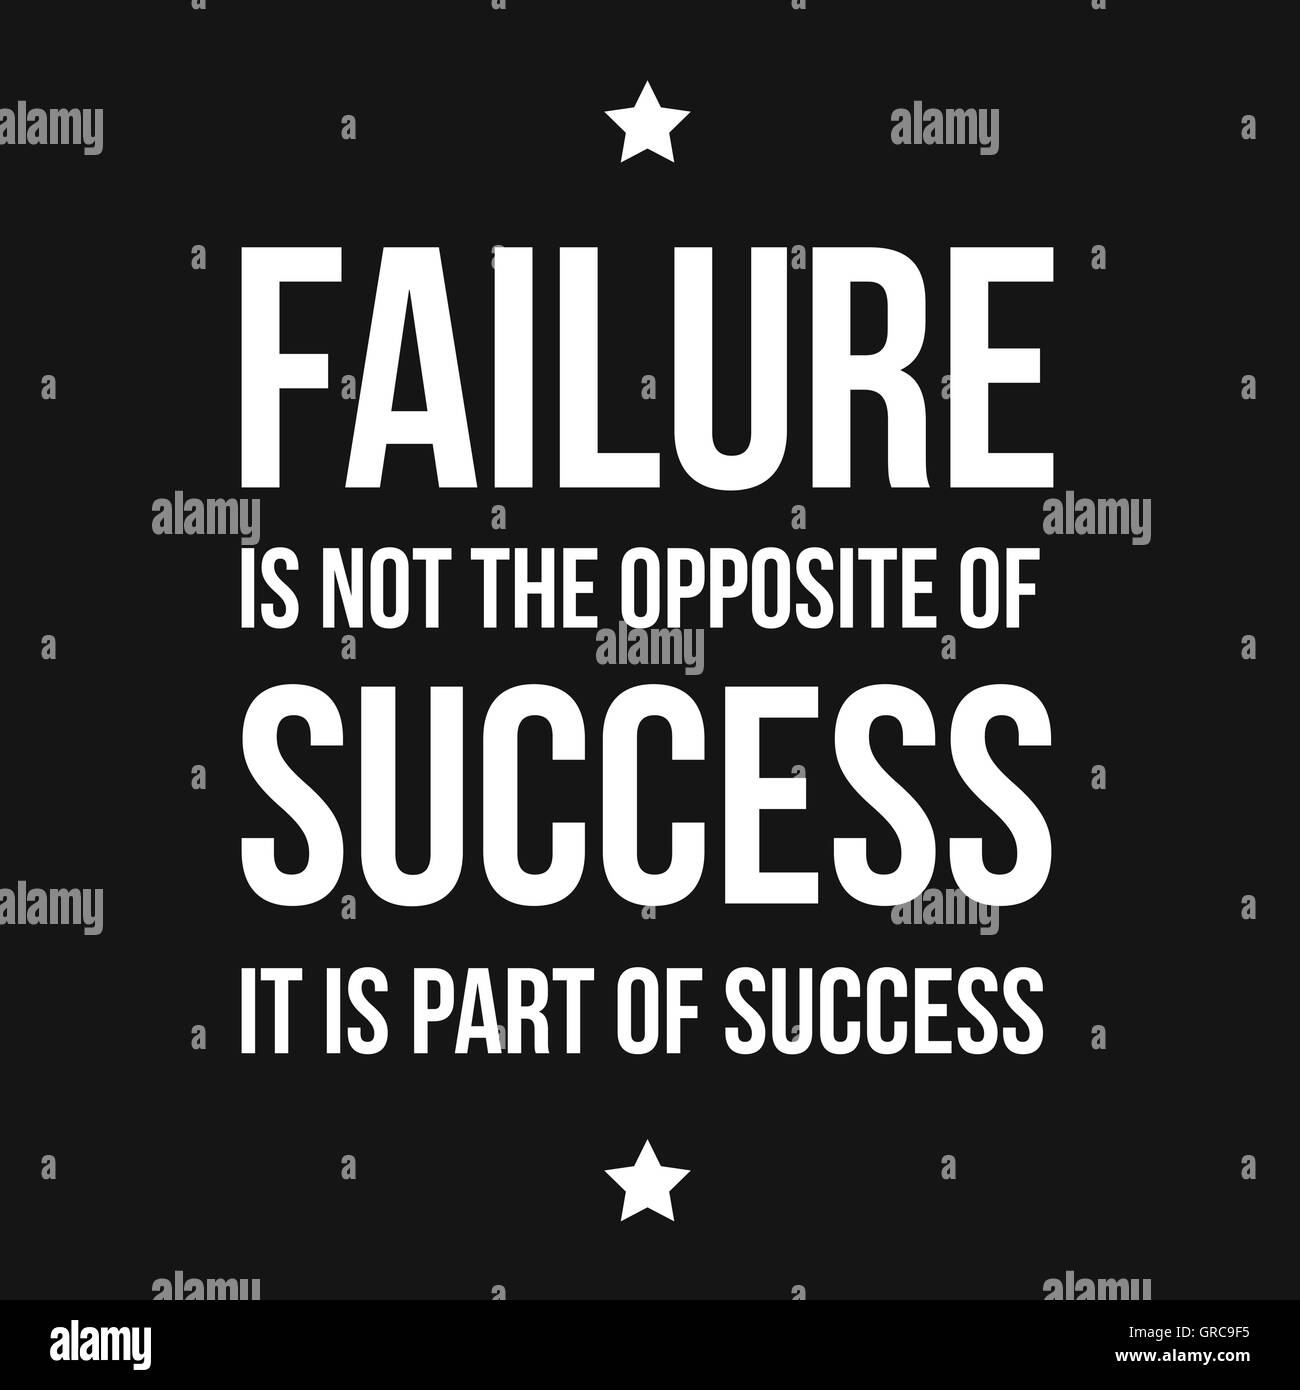 Failure is not opposite of success - Inspirational motivating qu Stock Vector